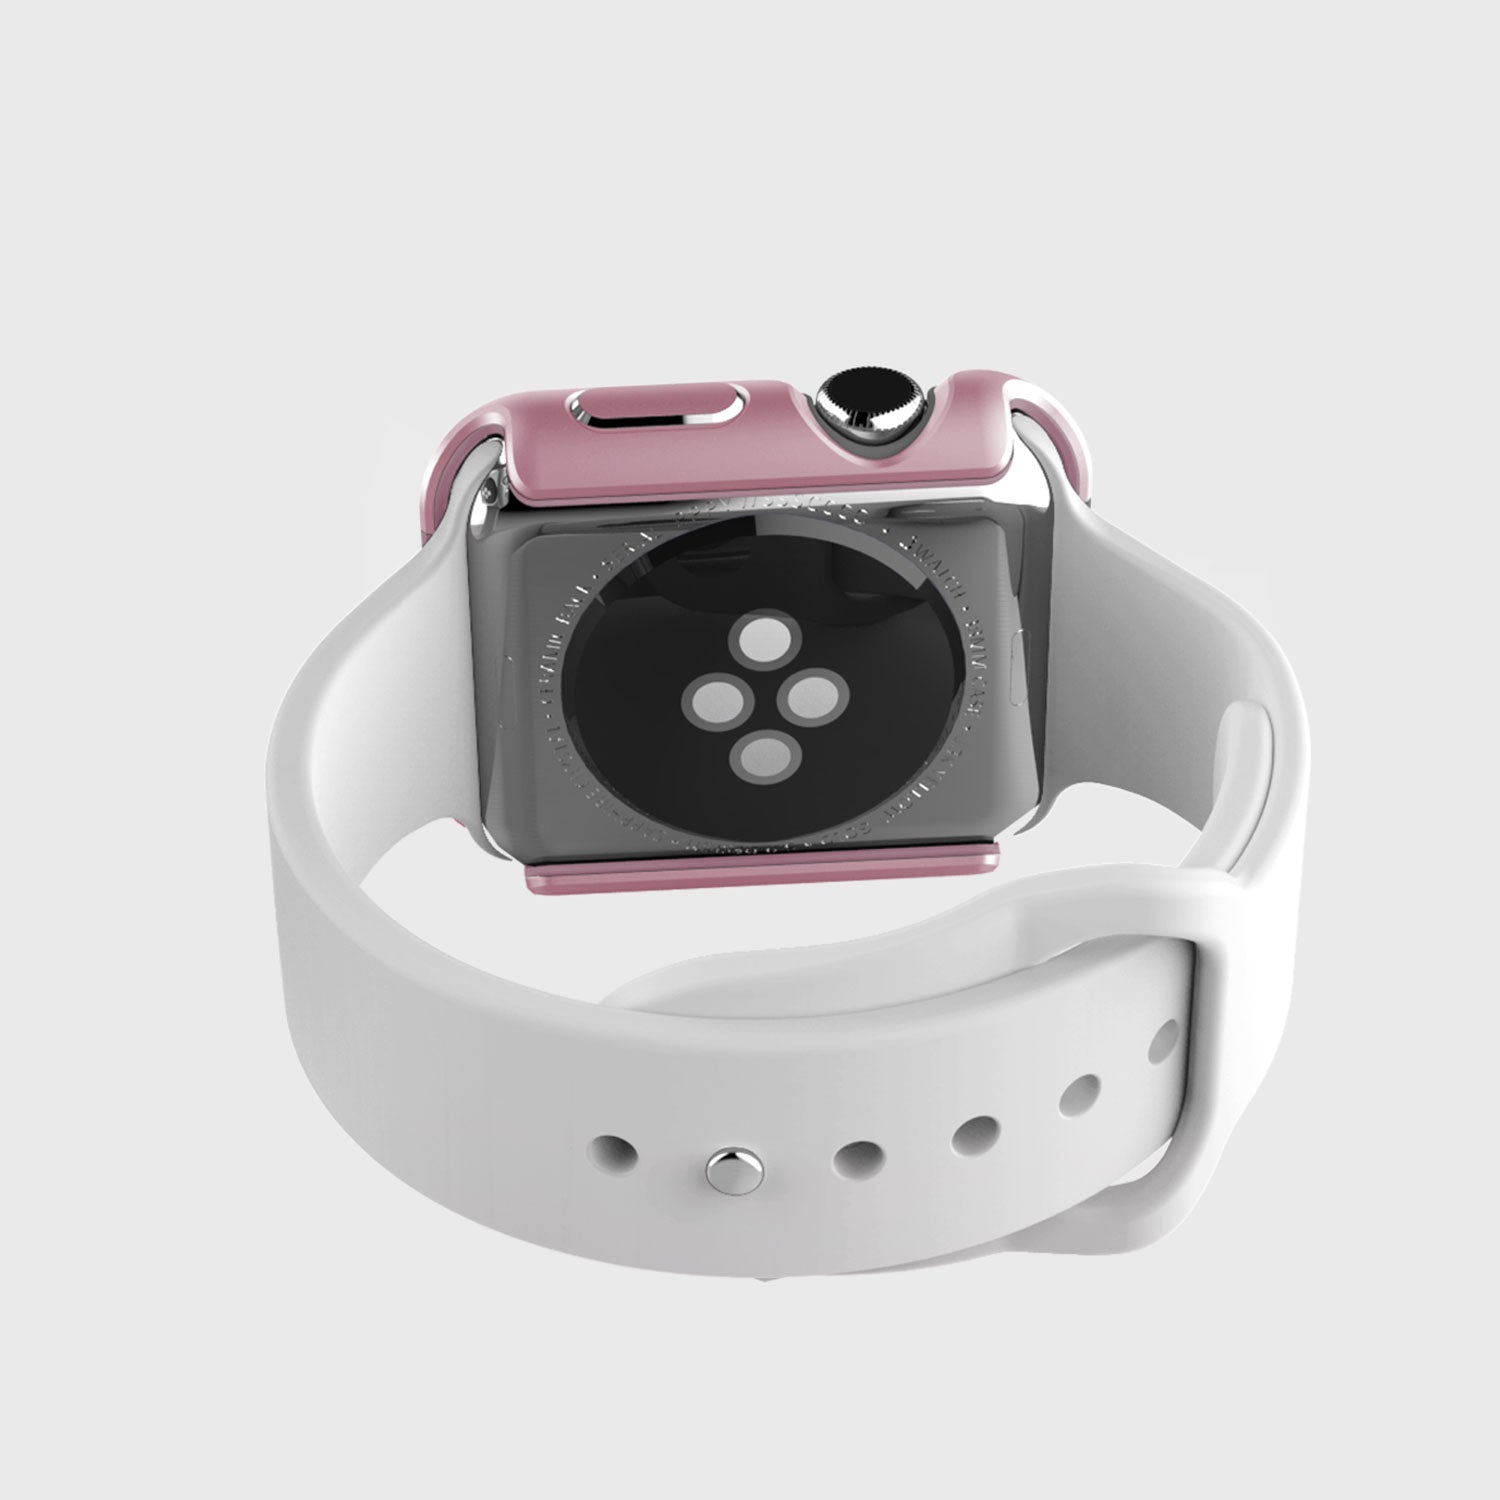 An Raptic Apple Watch 42mm Case - EDGE with a pink strap and a machined anodized aluminum bumper that protects it.